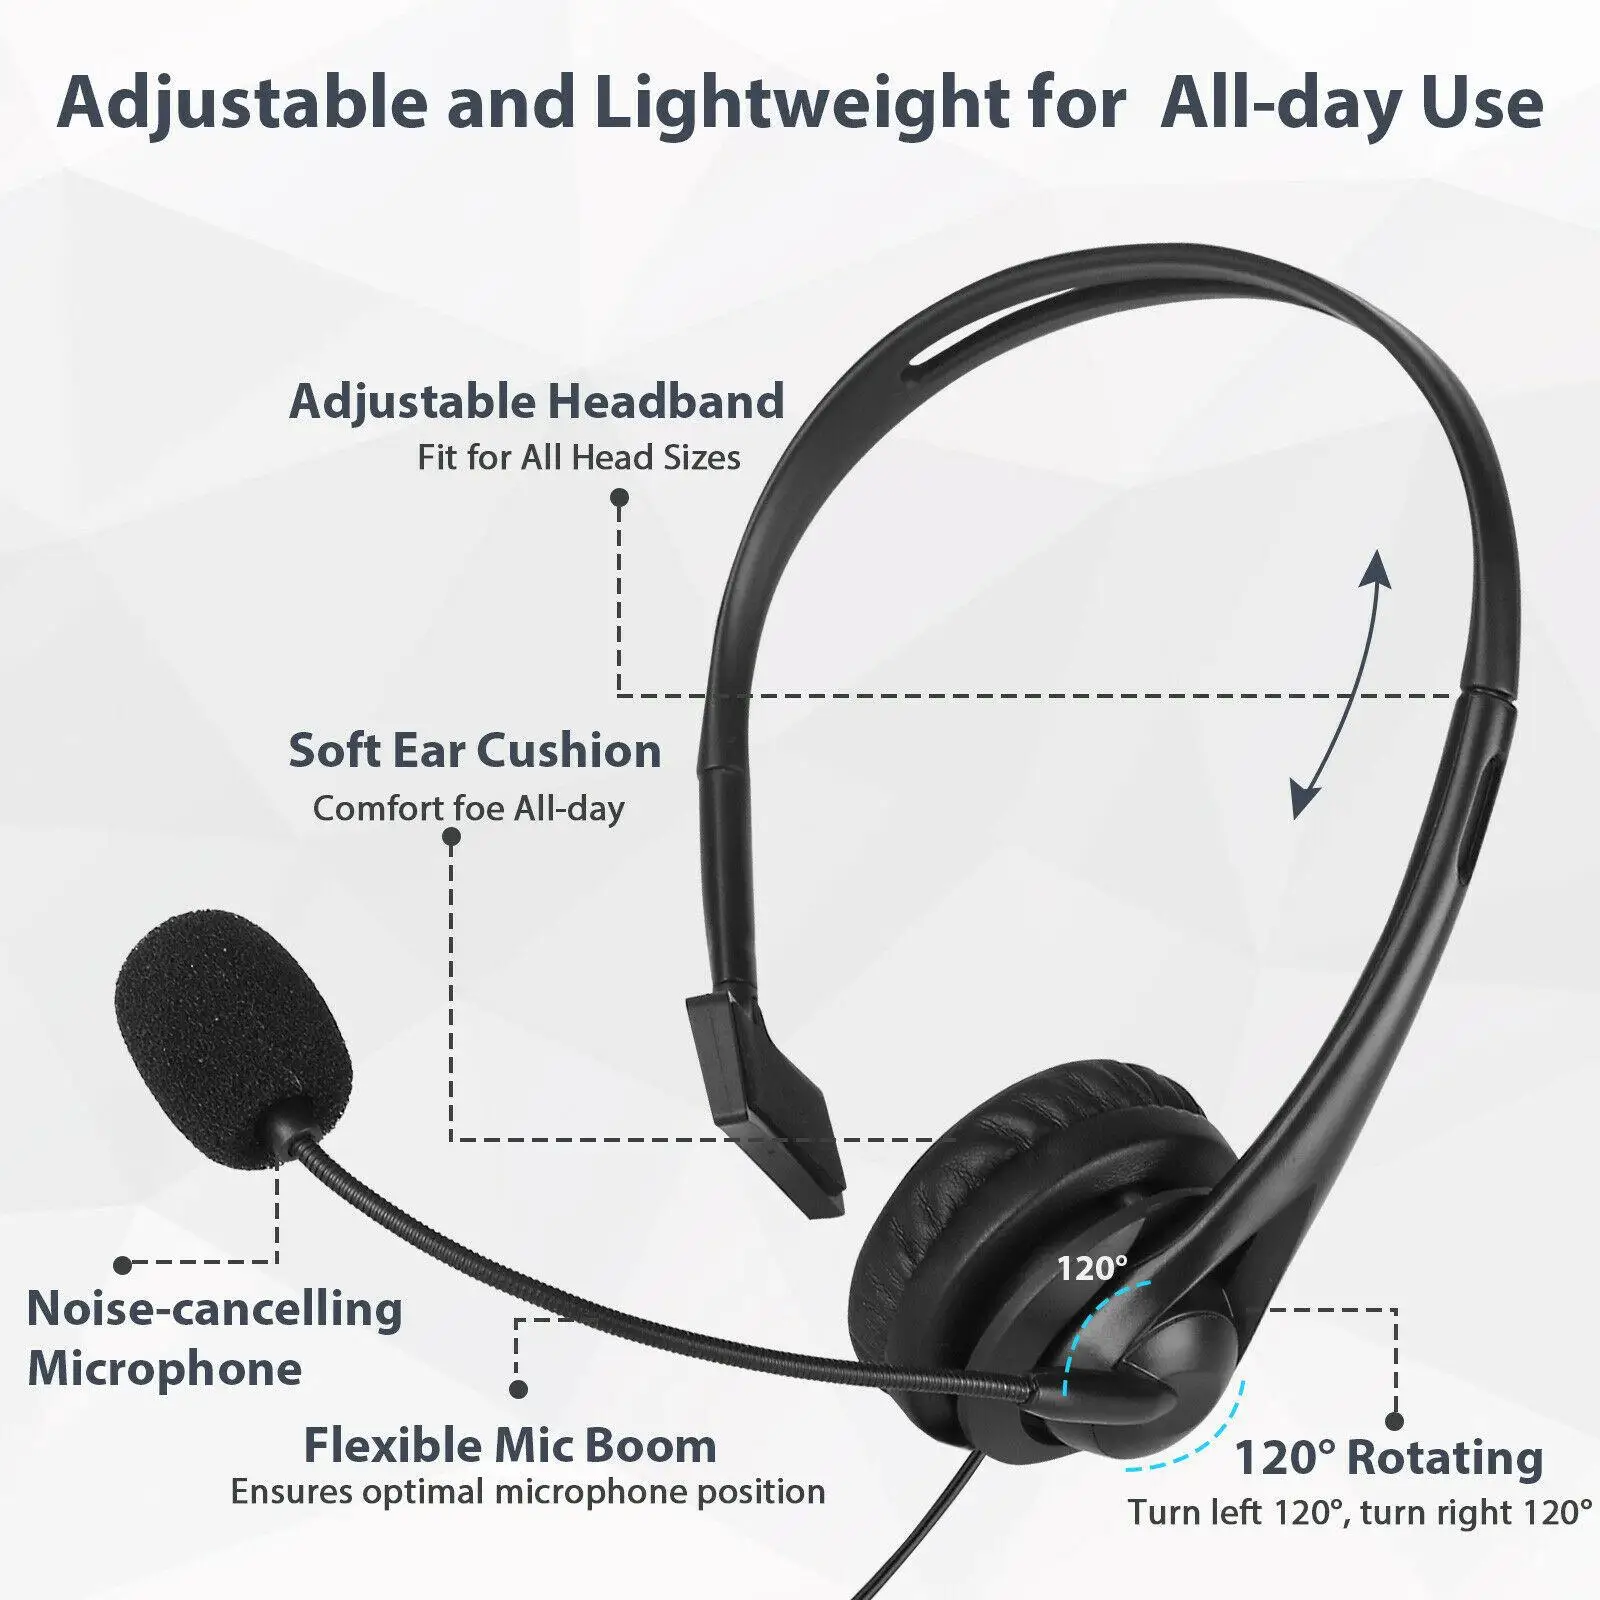 Headphone with Microphone VOLUME Control for PC LAPTOP Cancellation of The